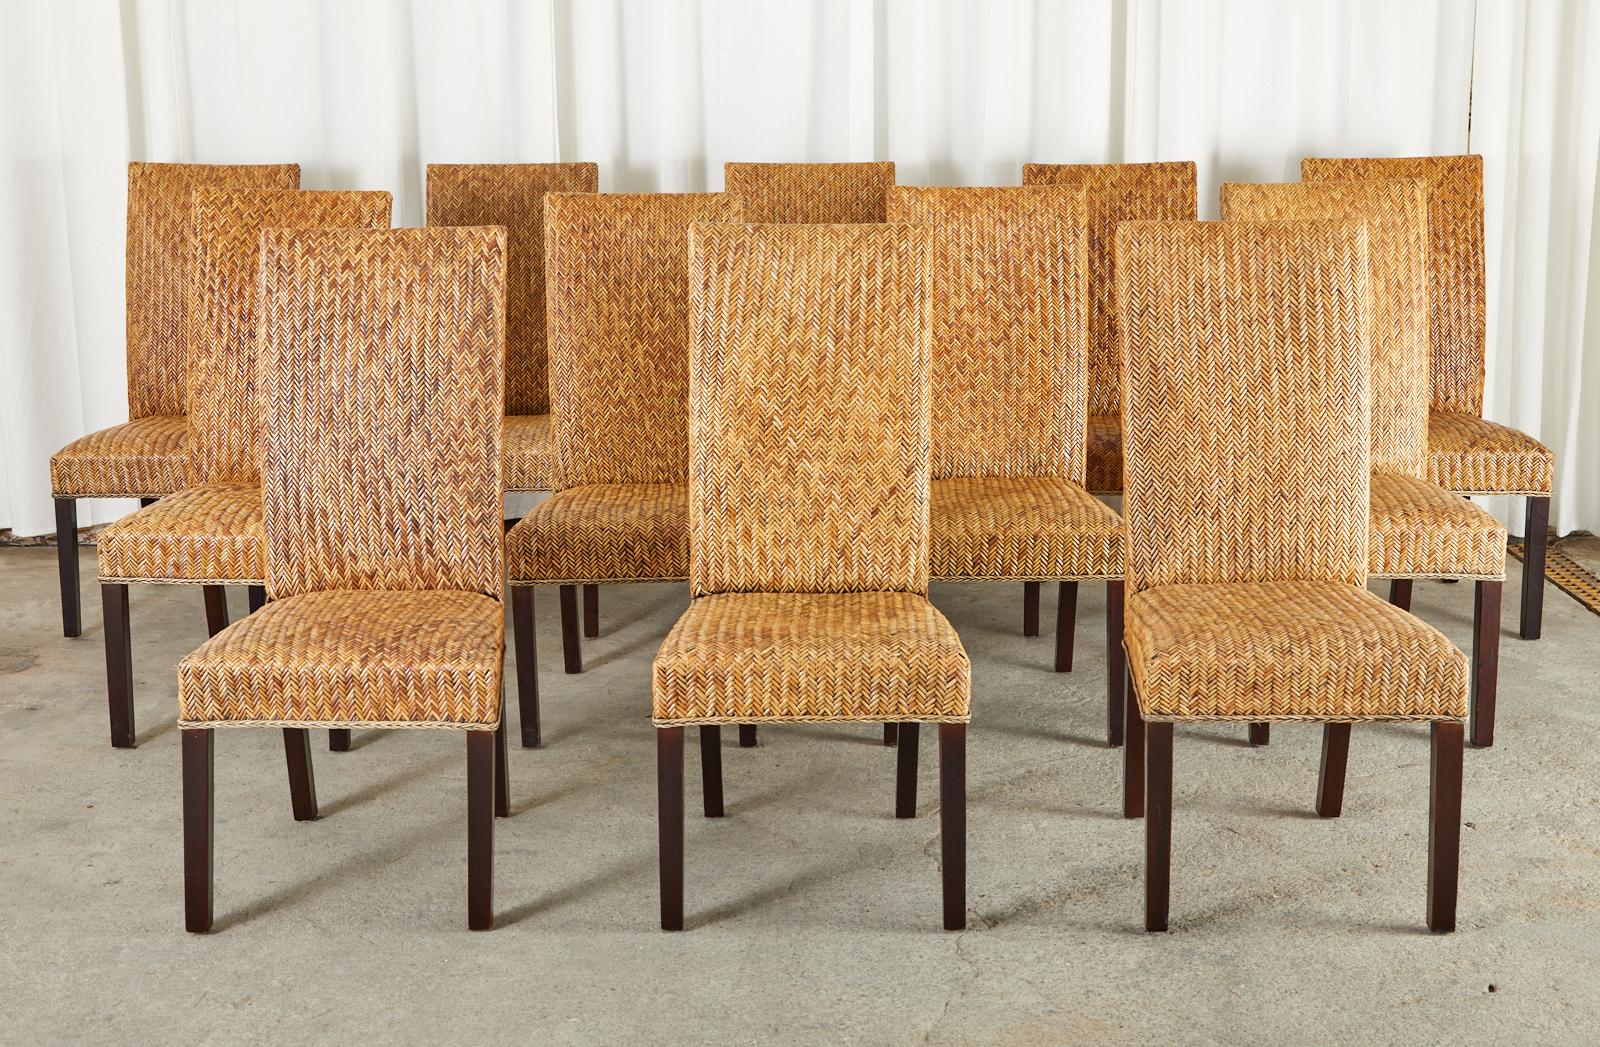 Large set of twenty four gorgeous rattan dining chairs made in the organic modern style. The chairs feature a split rattan woven reed that has a herringbone or chevron design pattern. The frames are constructed of hardwood with a near ebonized